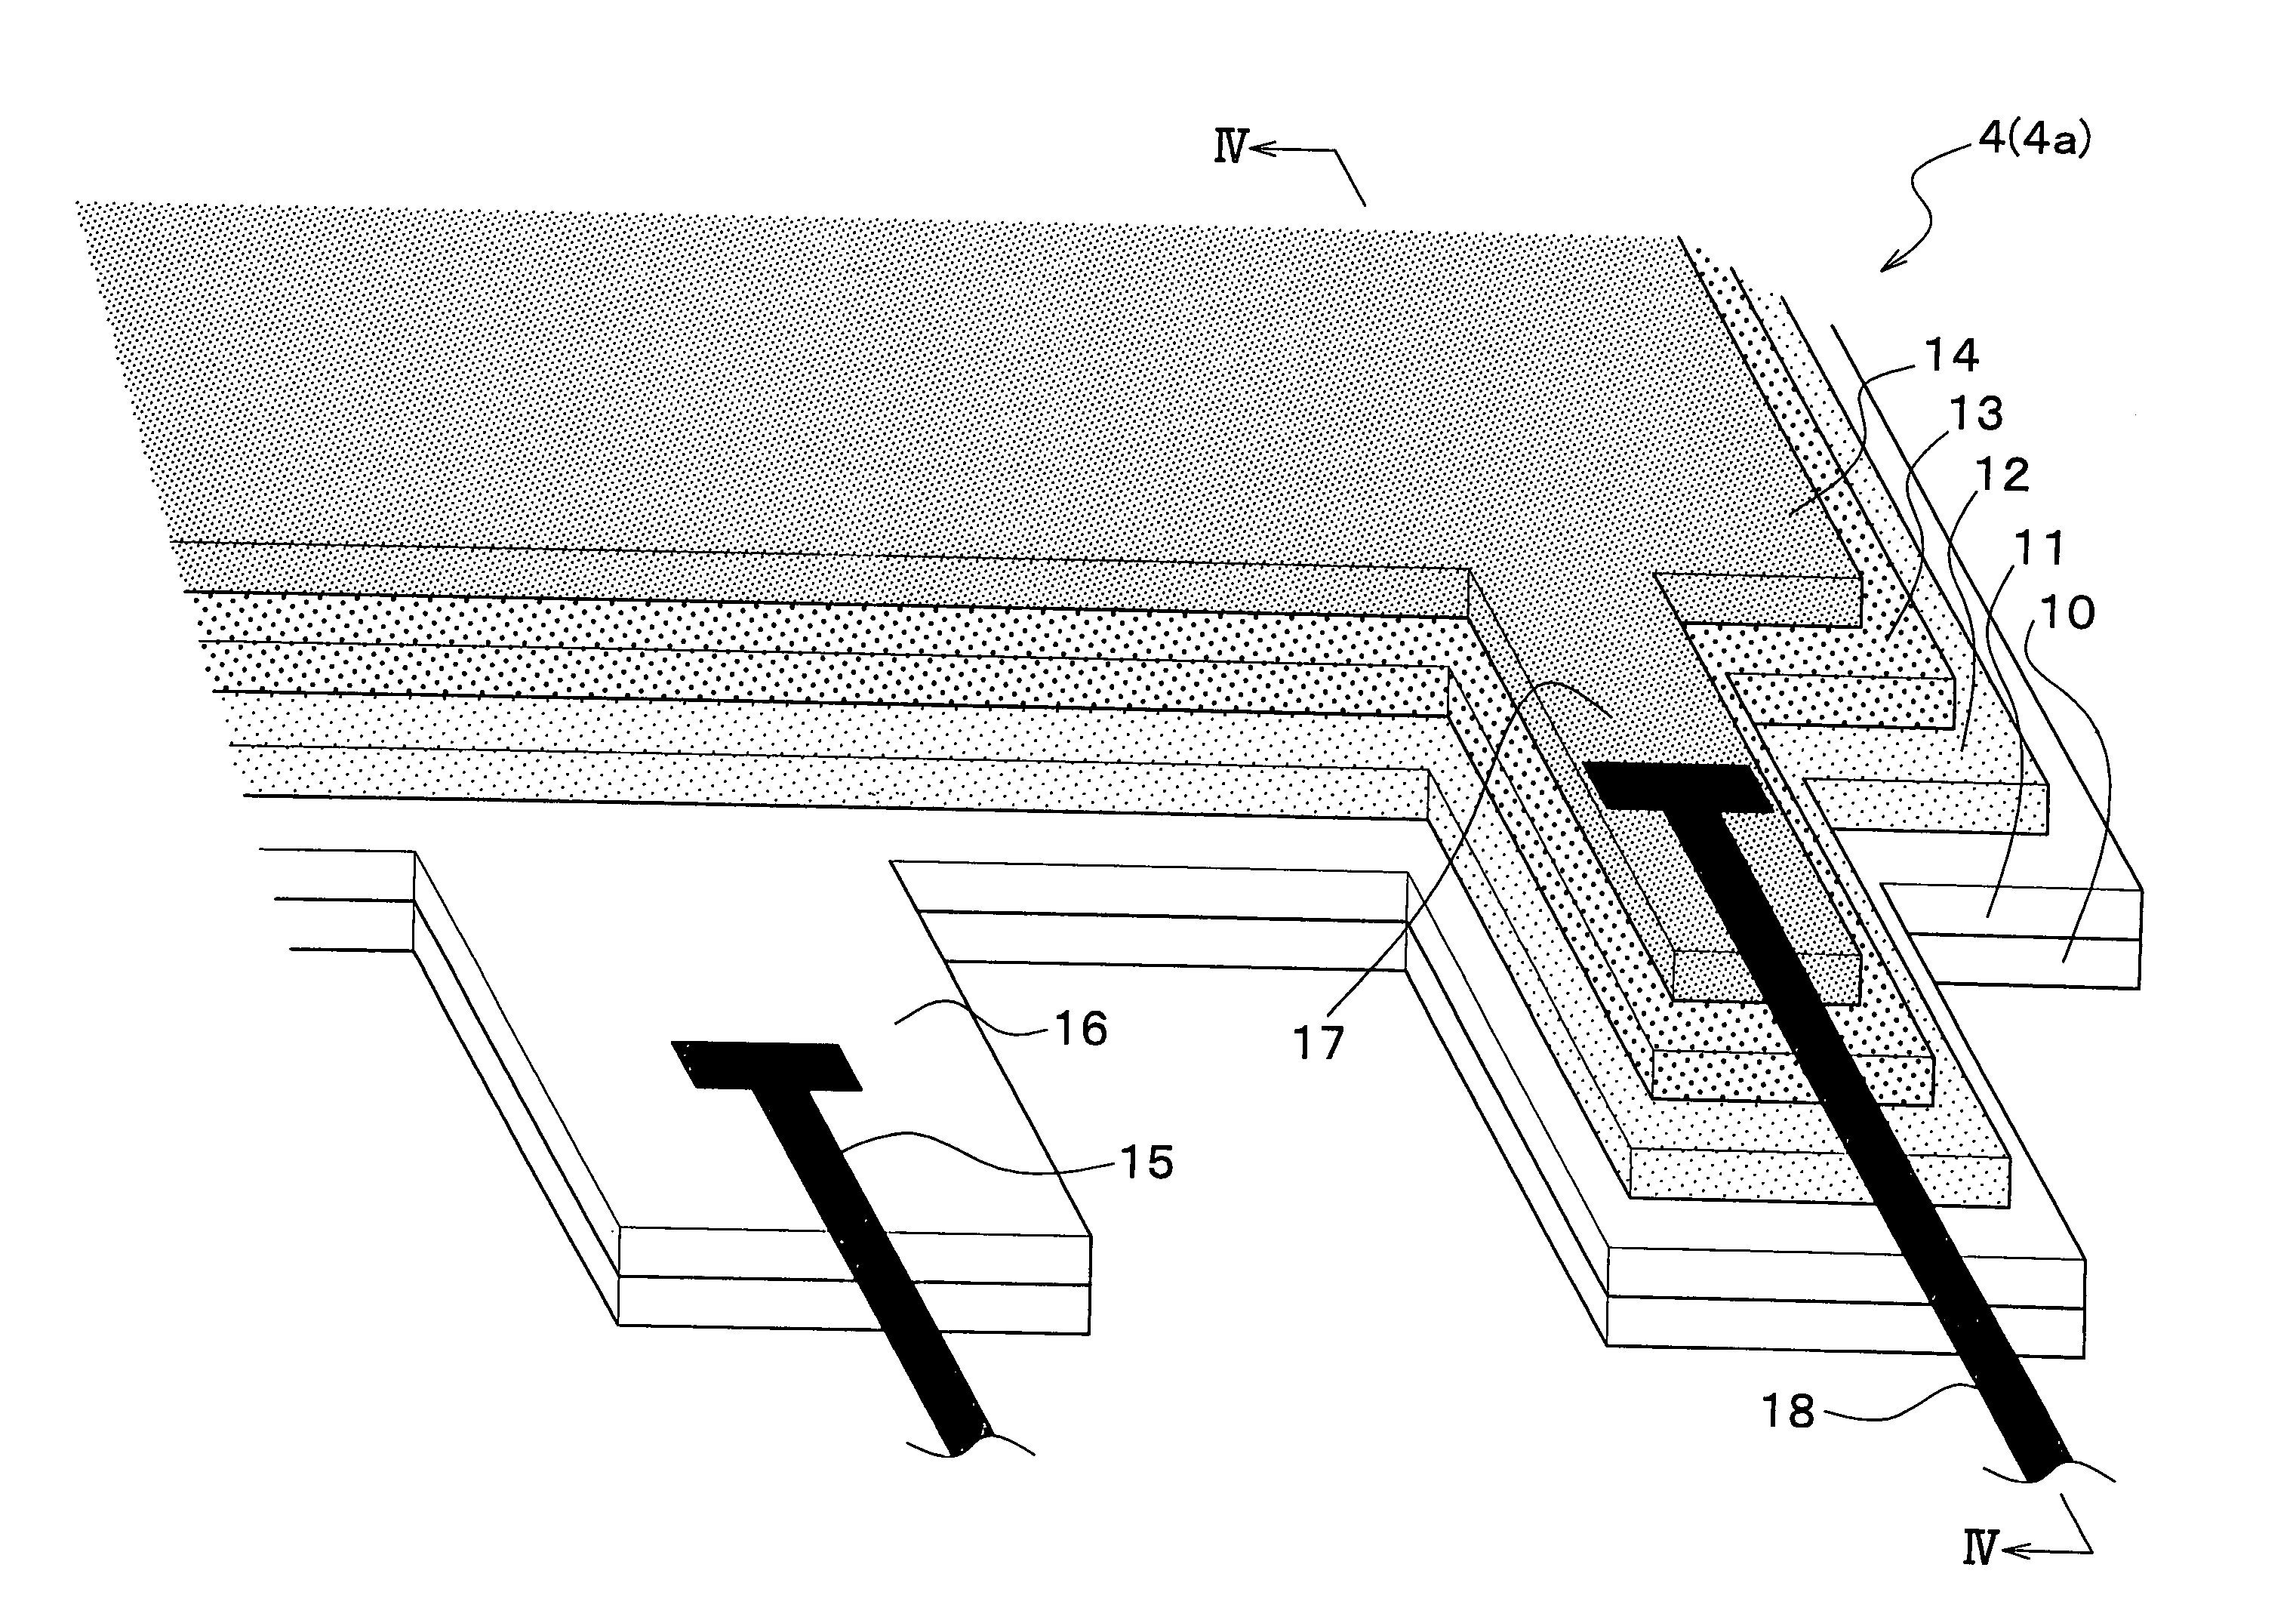 Sunroof panel apparatus for a vehicle